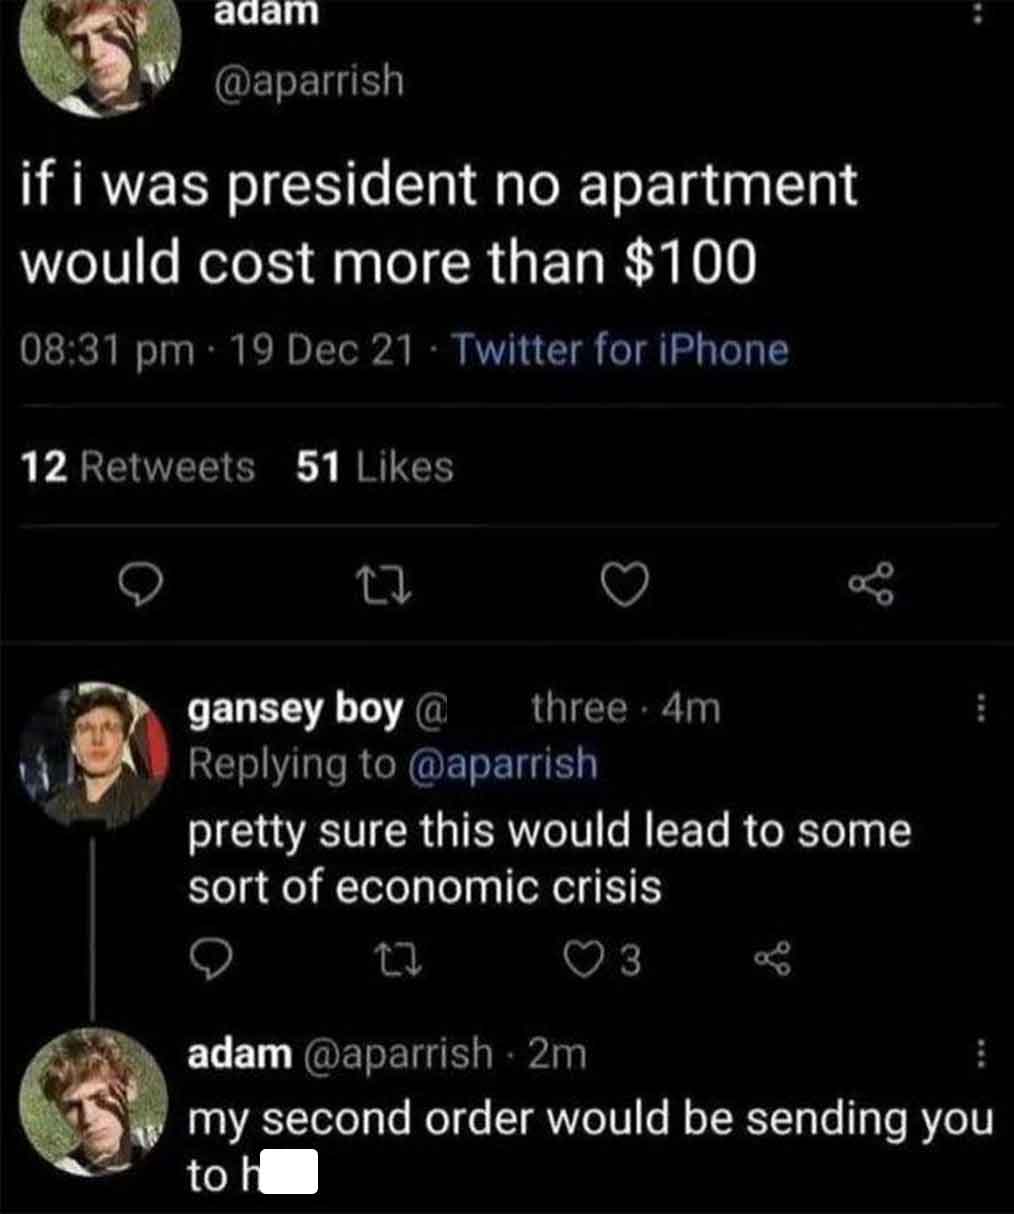 funny tweets june 2024 - screenshot - adam if i was president no apartment would cost more than $100 19 Dec 21 Twitter for iPhone 12 51 gansey boy@ three 4m pretty sure this would lead to some sort of economic crisis 27 3 adam 2m my second order would be 